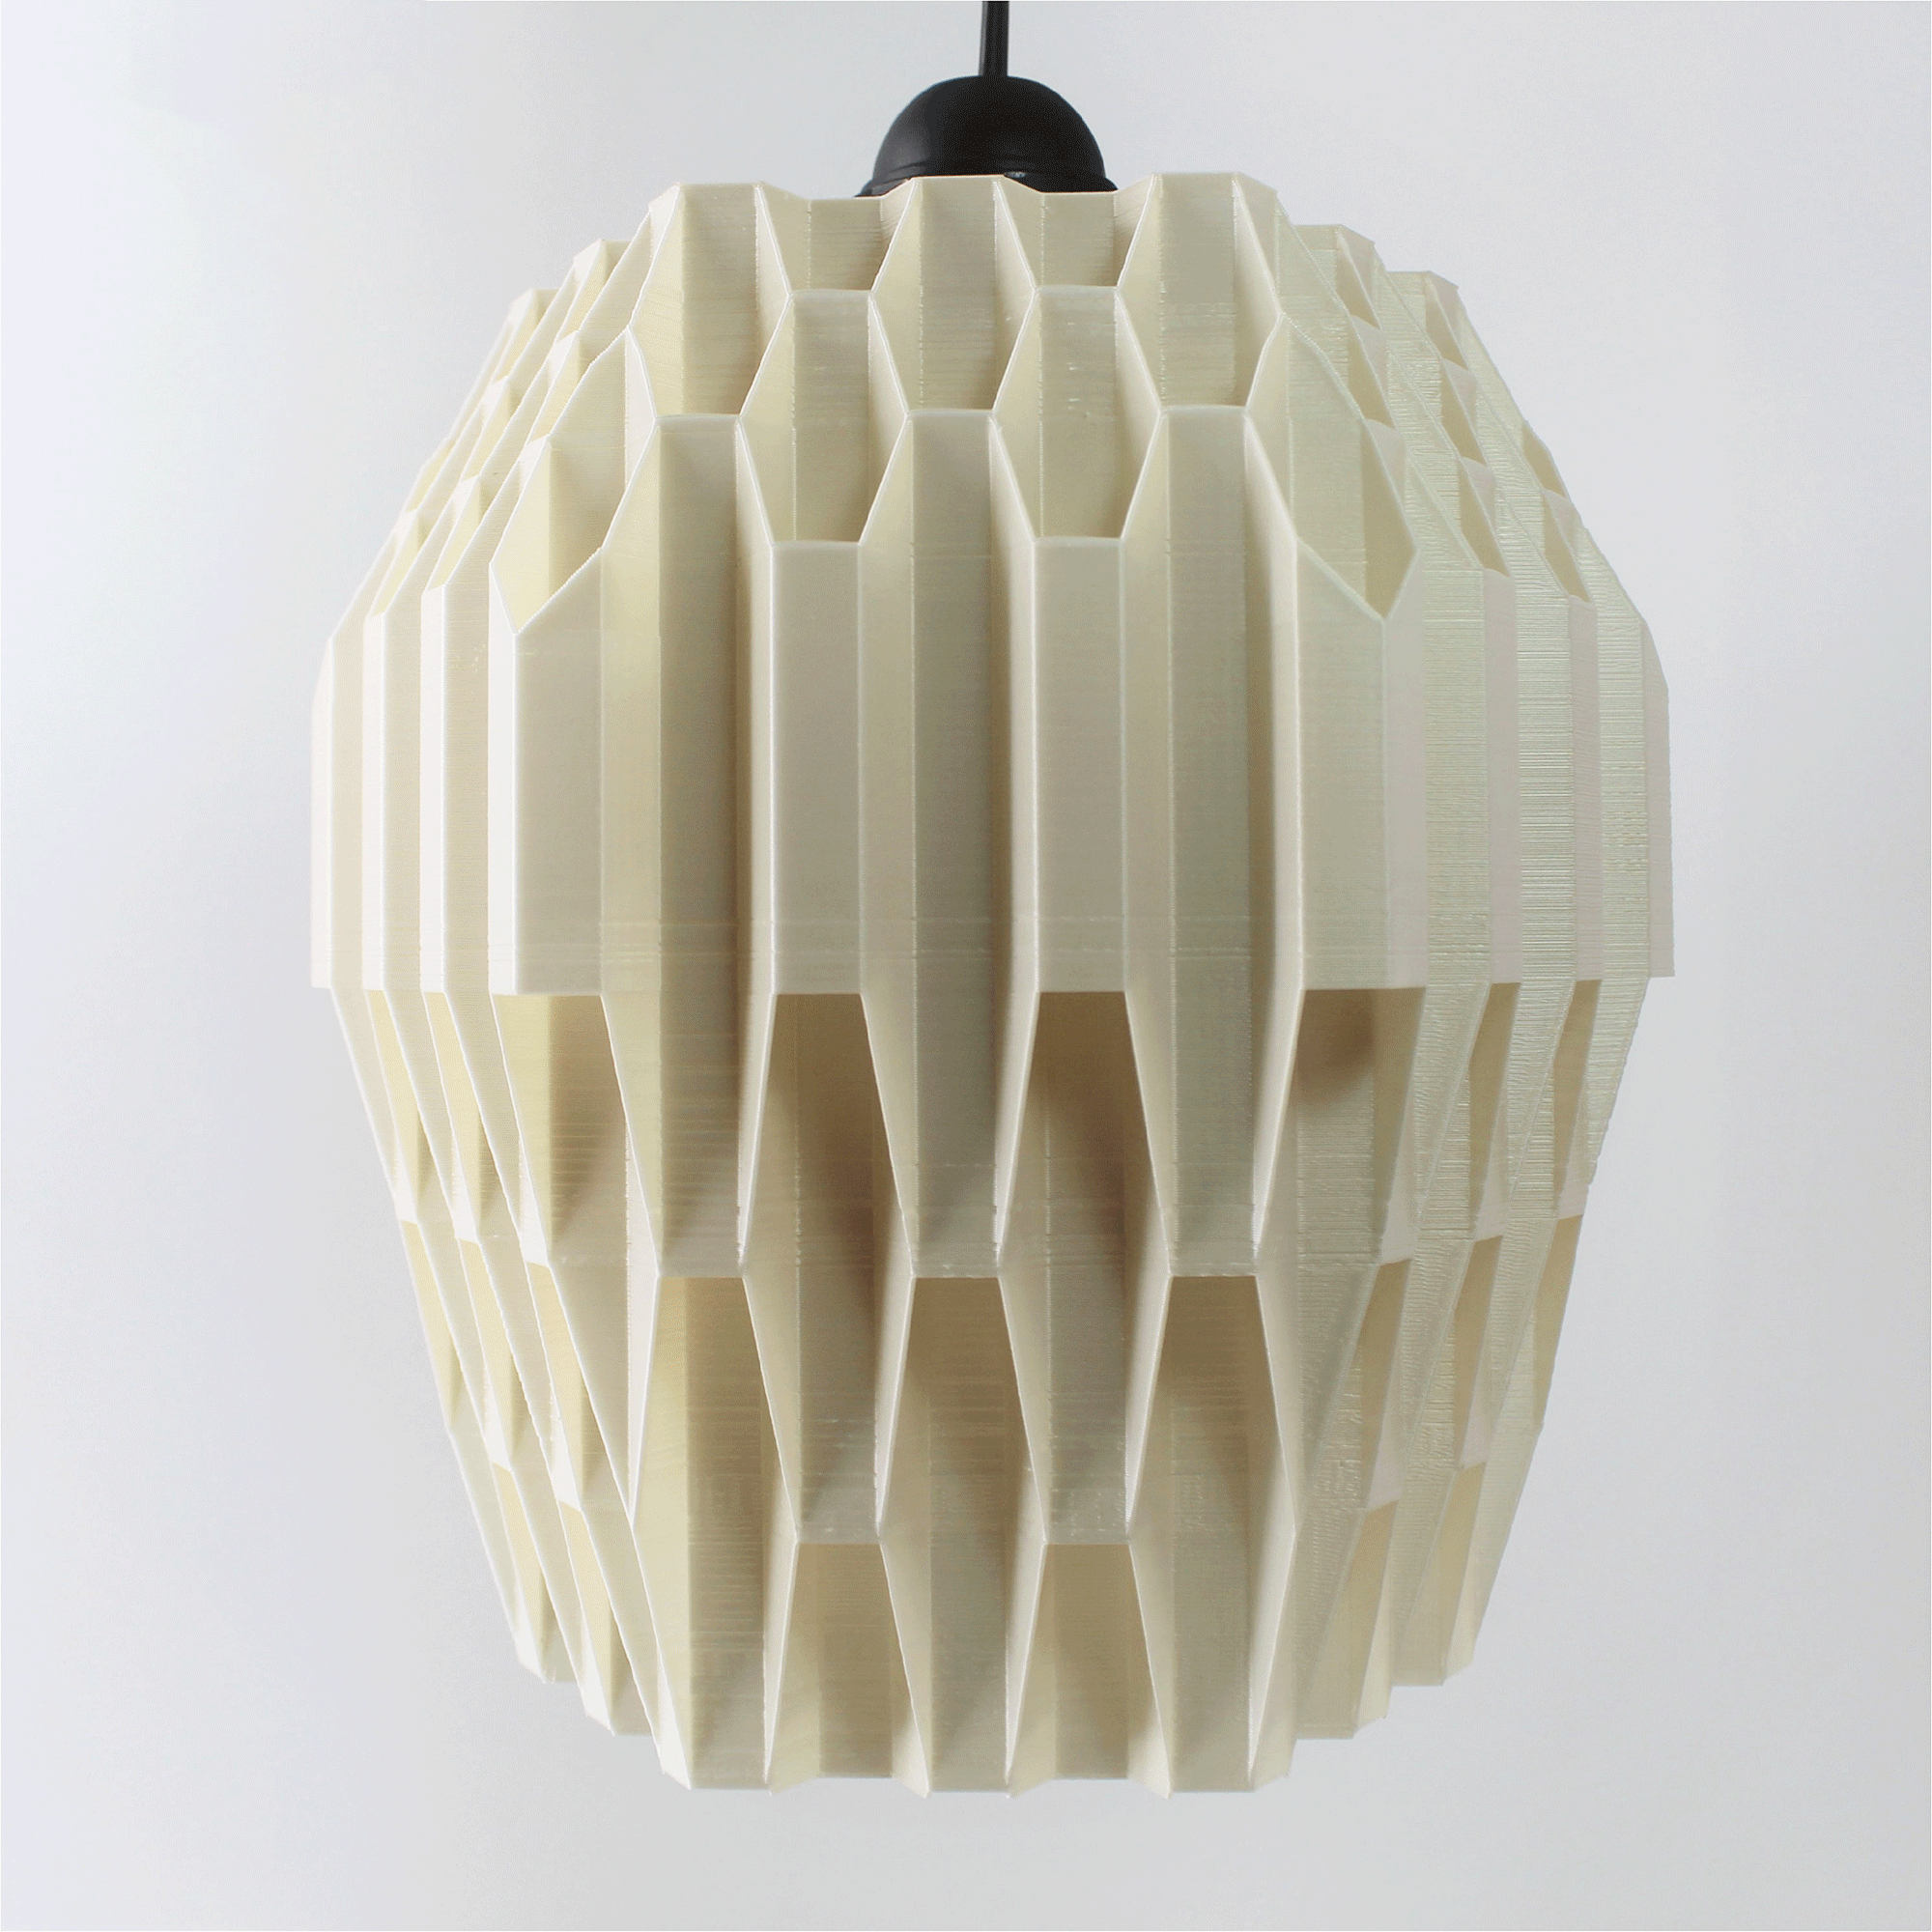 The Honeycomb Lampshade: Modern Ambient Glow